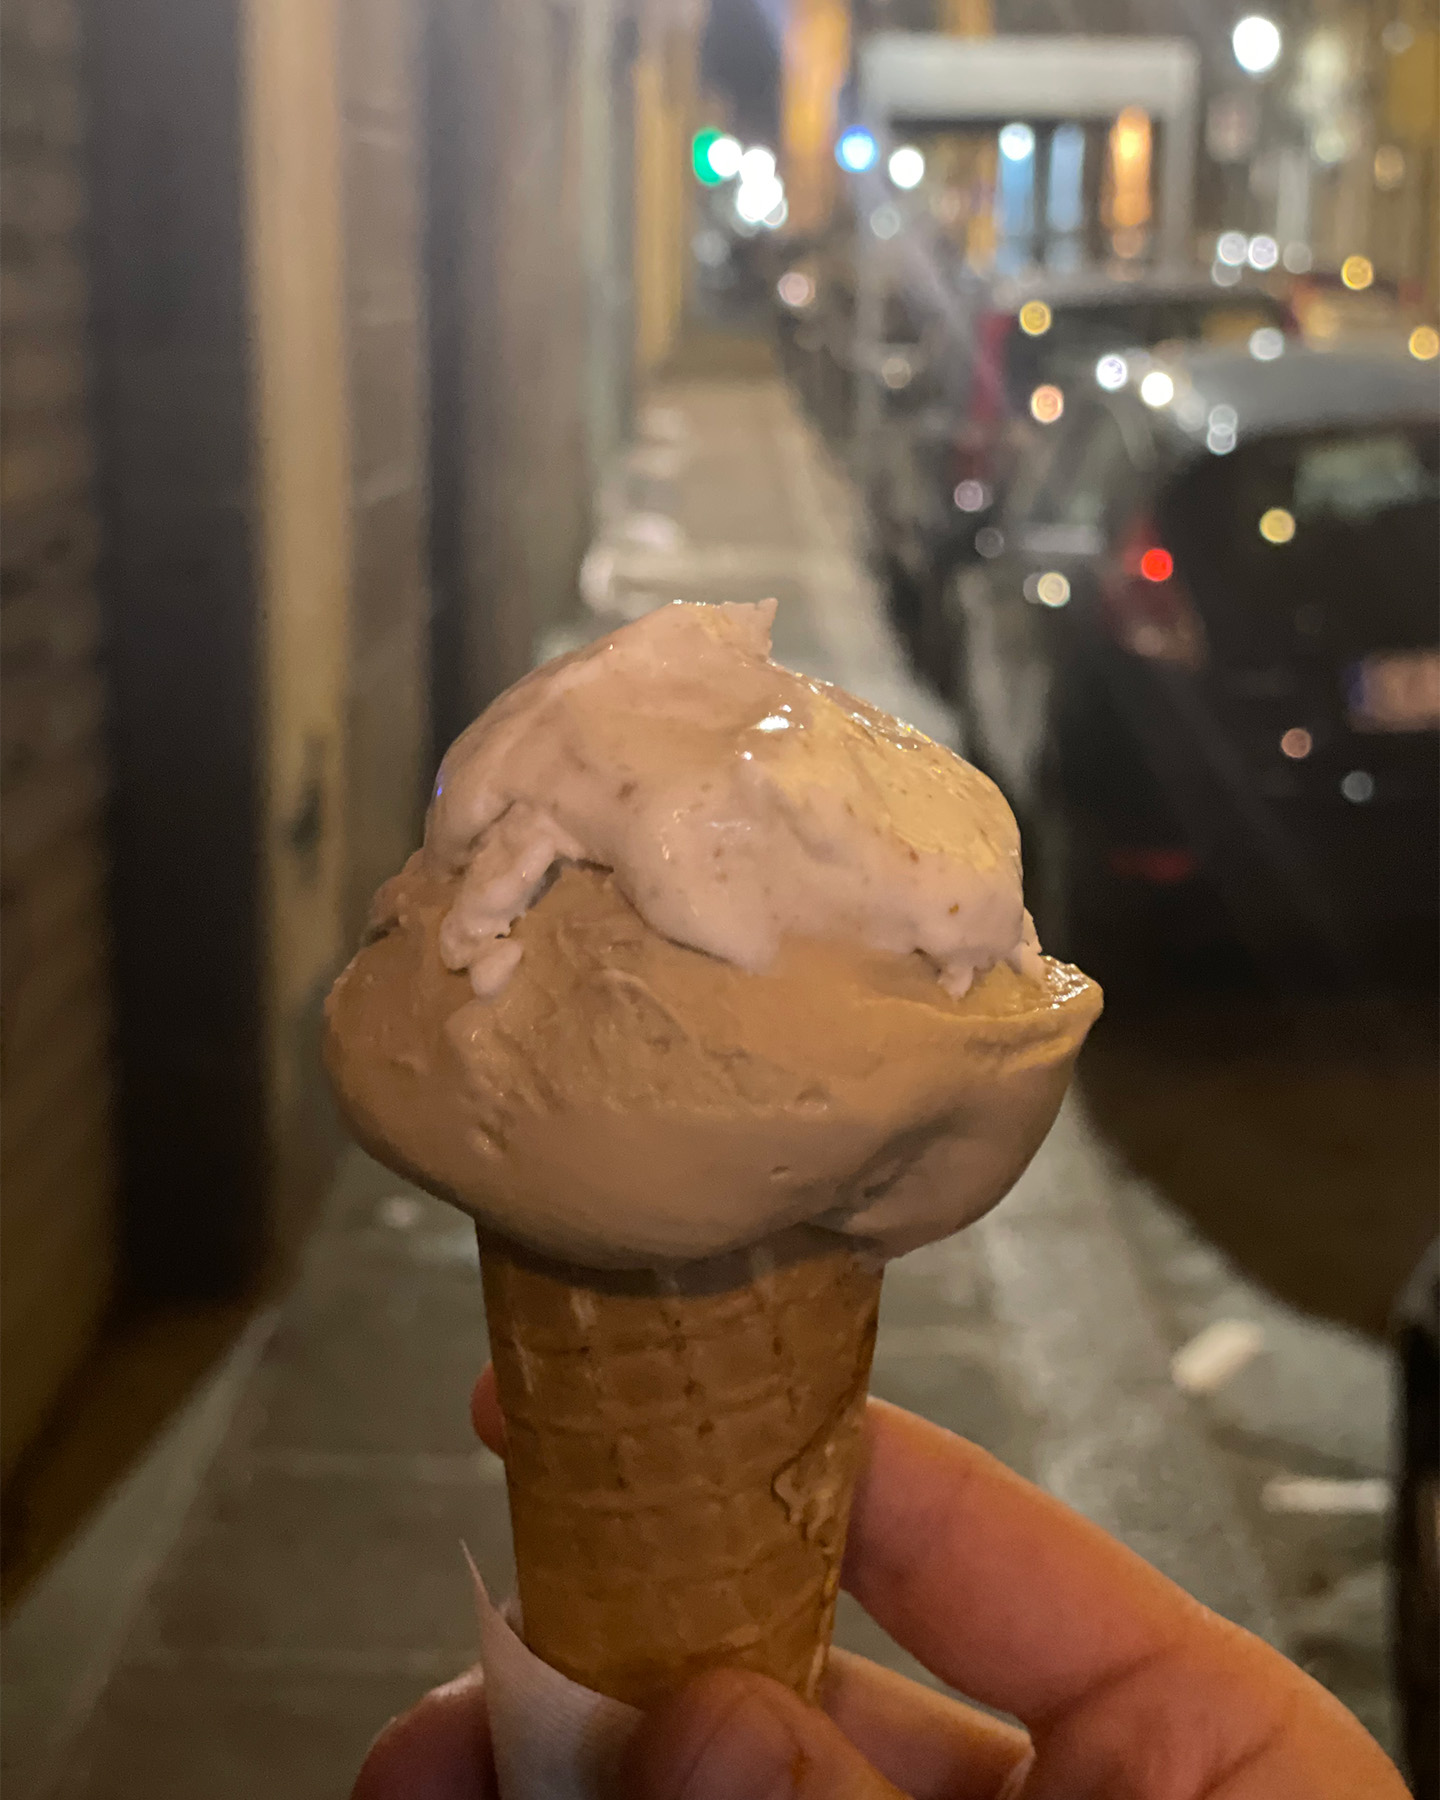 On the CRAFTED podcast, Jonathan Ellsworth talks with Alberto and Julia Bati, owners of My Sugar Gelato Artigianale, about the craft (and the hard work) of making some of the best gelato in the world. Here is that conversation, fresh from Florence.